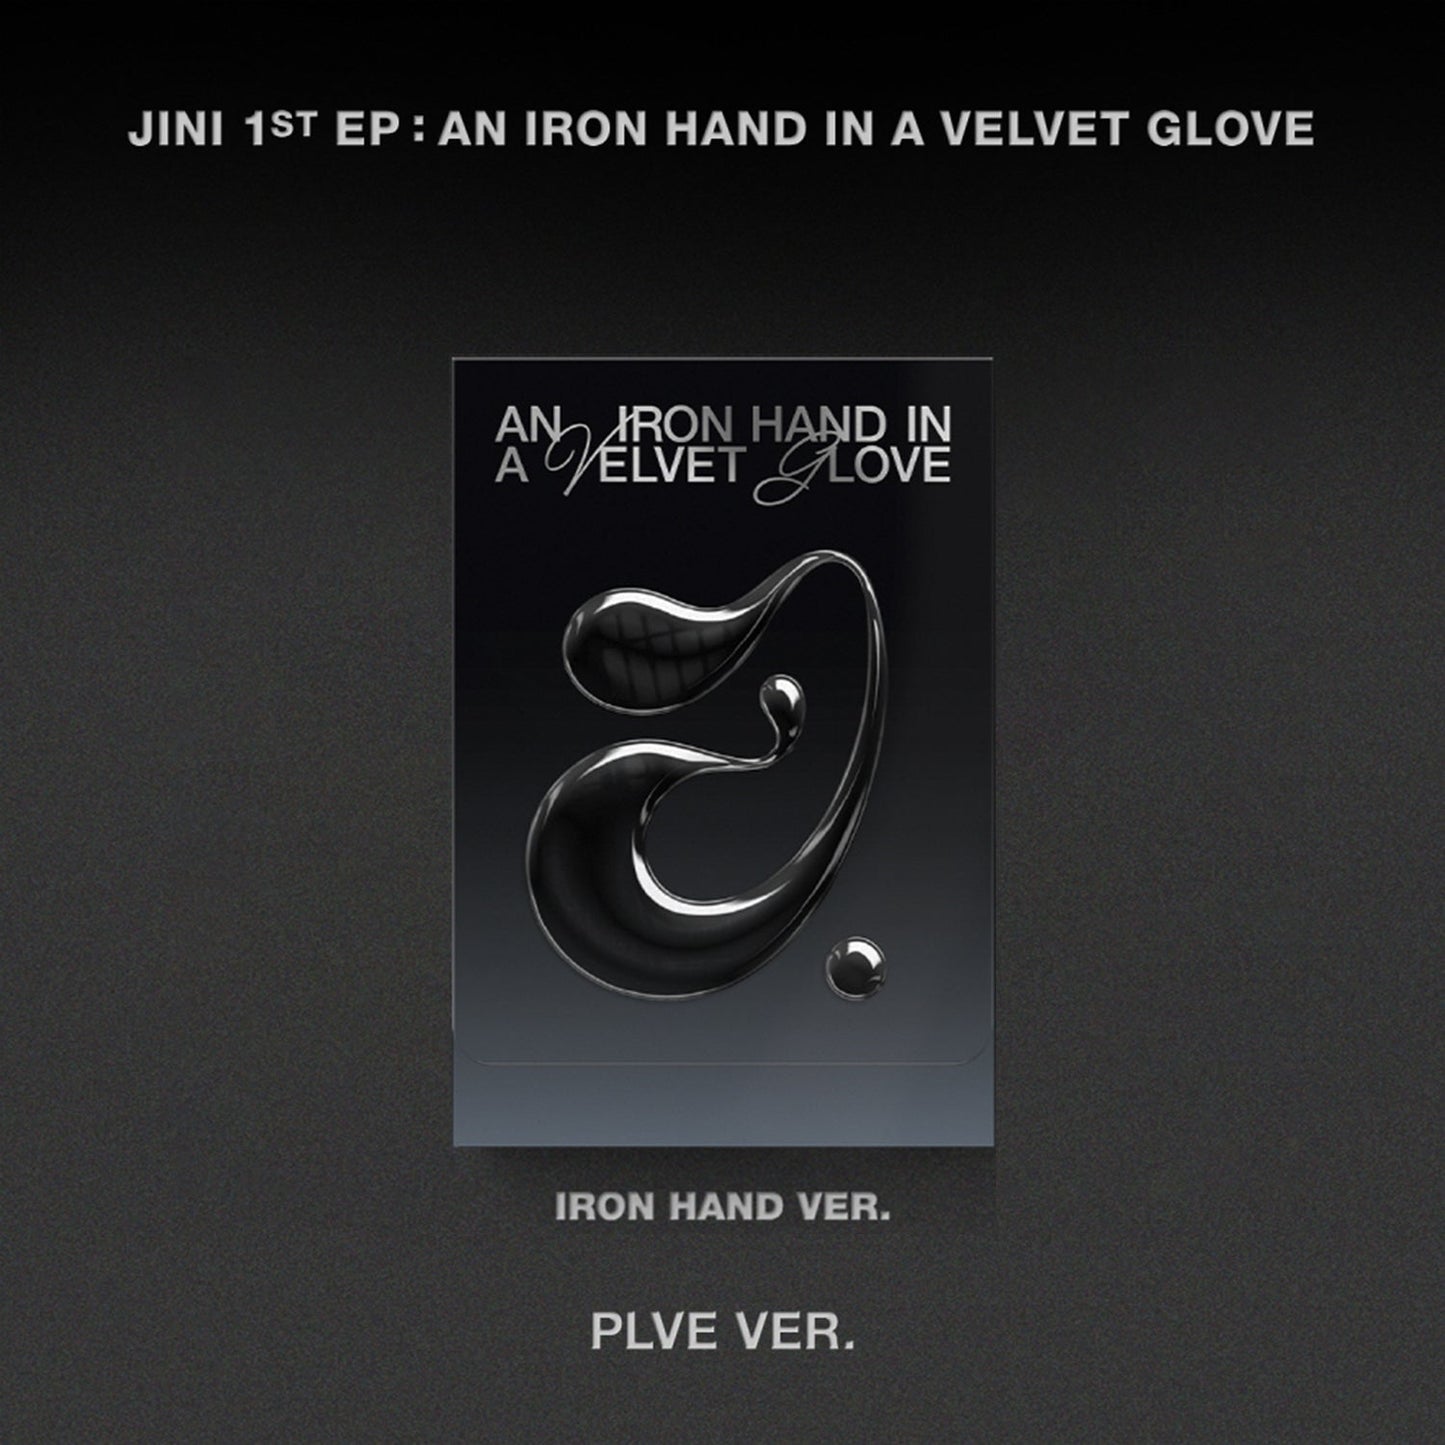 JINI 1ST EP ALBUM 'AN IRON HAND IN A VELVET GLOVE' (PLVE) IRON HAND VERSION COVER